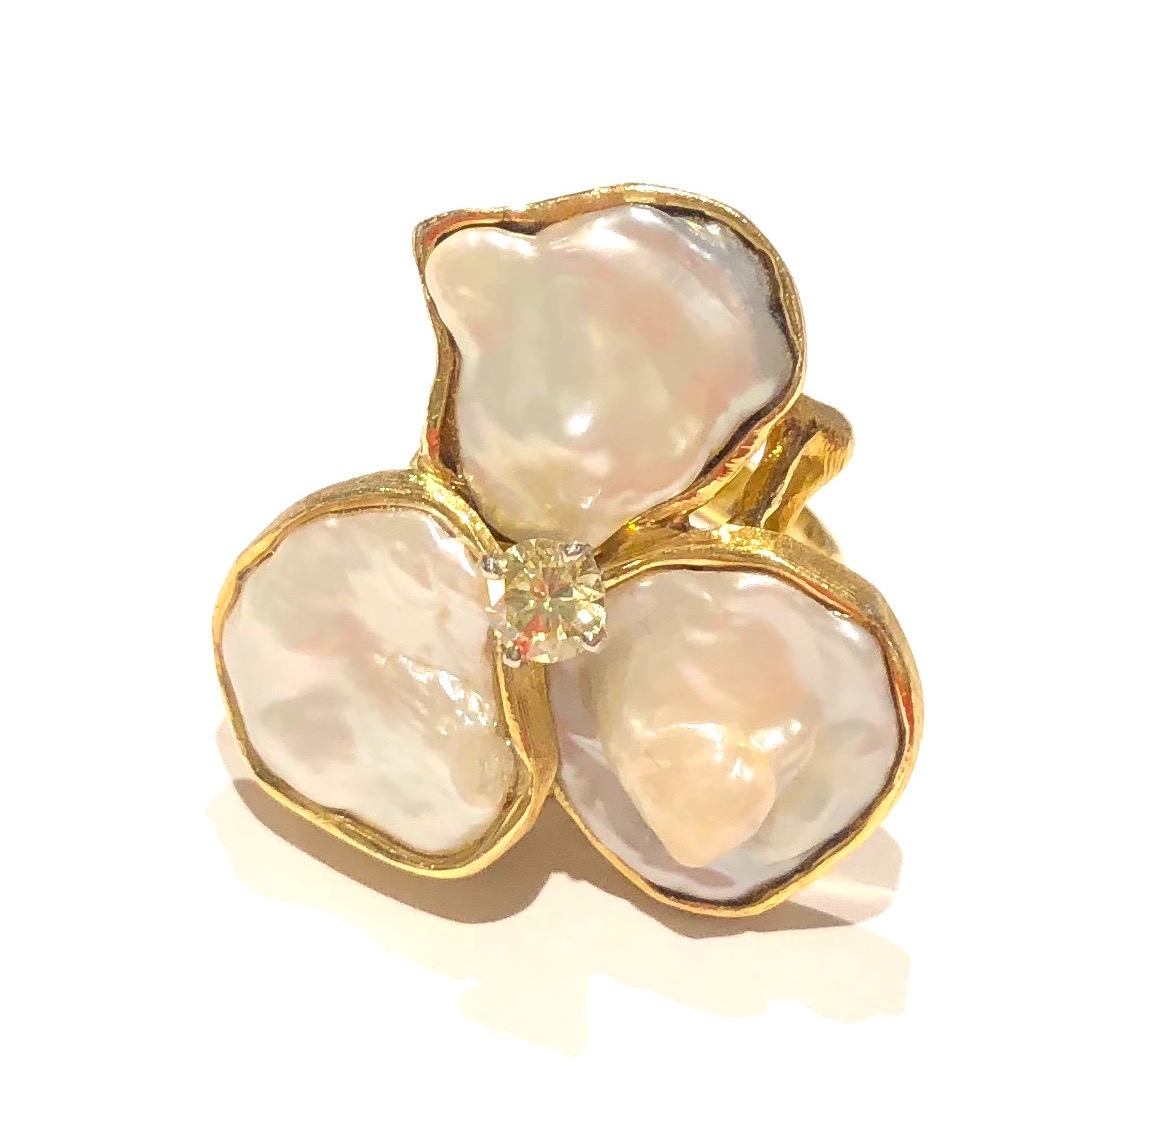 William Ruser, Beverly Hills “Lotus Blossom” ring set with three large natural Baroque pearls and a yellow diamond in the center (approx. .50 carats by calculation) in an 18k gold highly textured structural gold mount, signed: R (for Ruser), 18k, c.1960